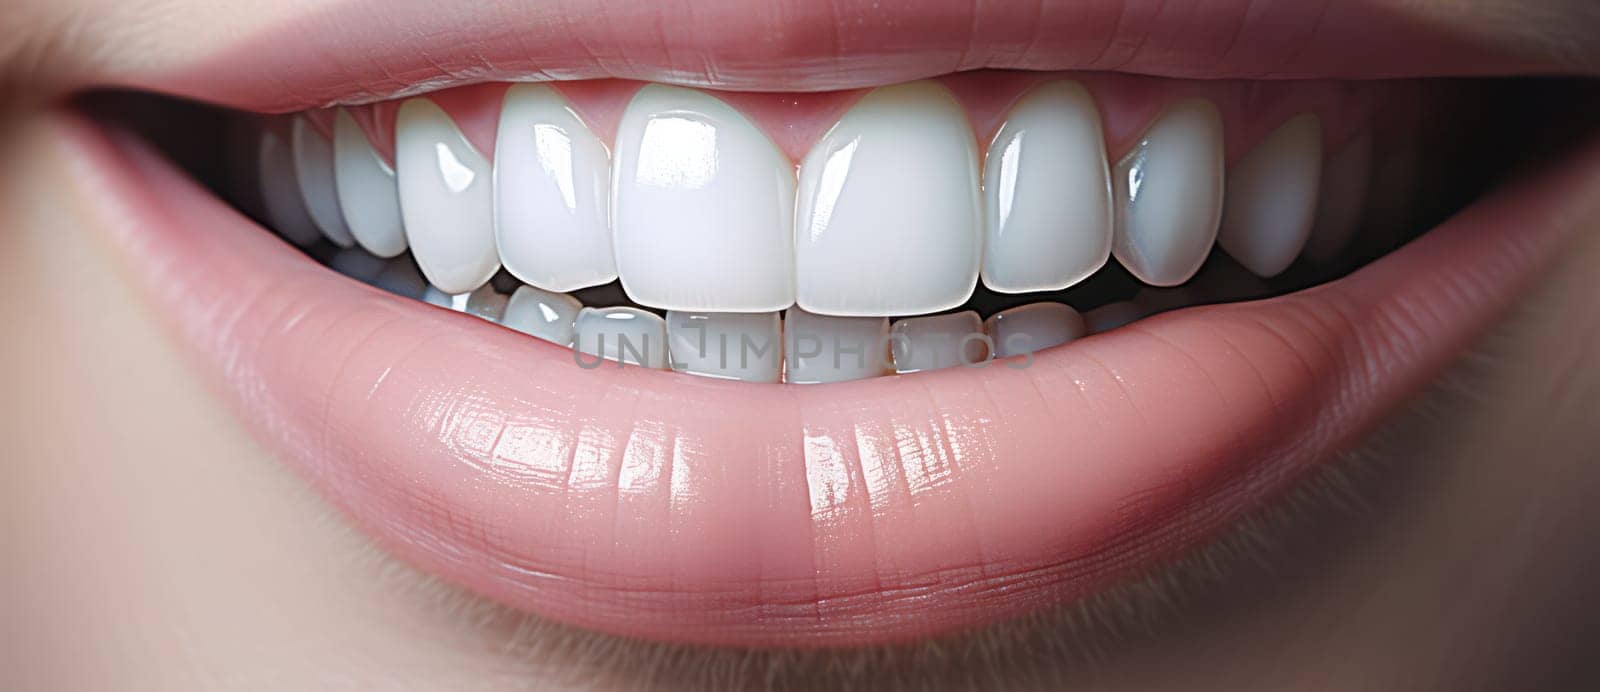 Healthy Dental Care: A Bright, Happy Smile of a Young Woman with Clean White Teeth and Shiny Lips, Close-up